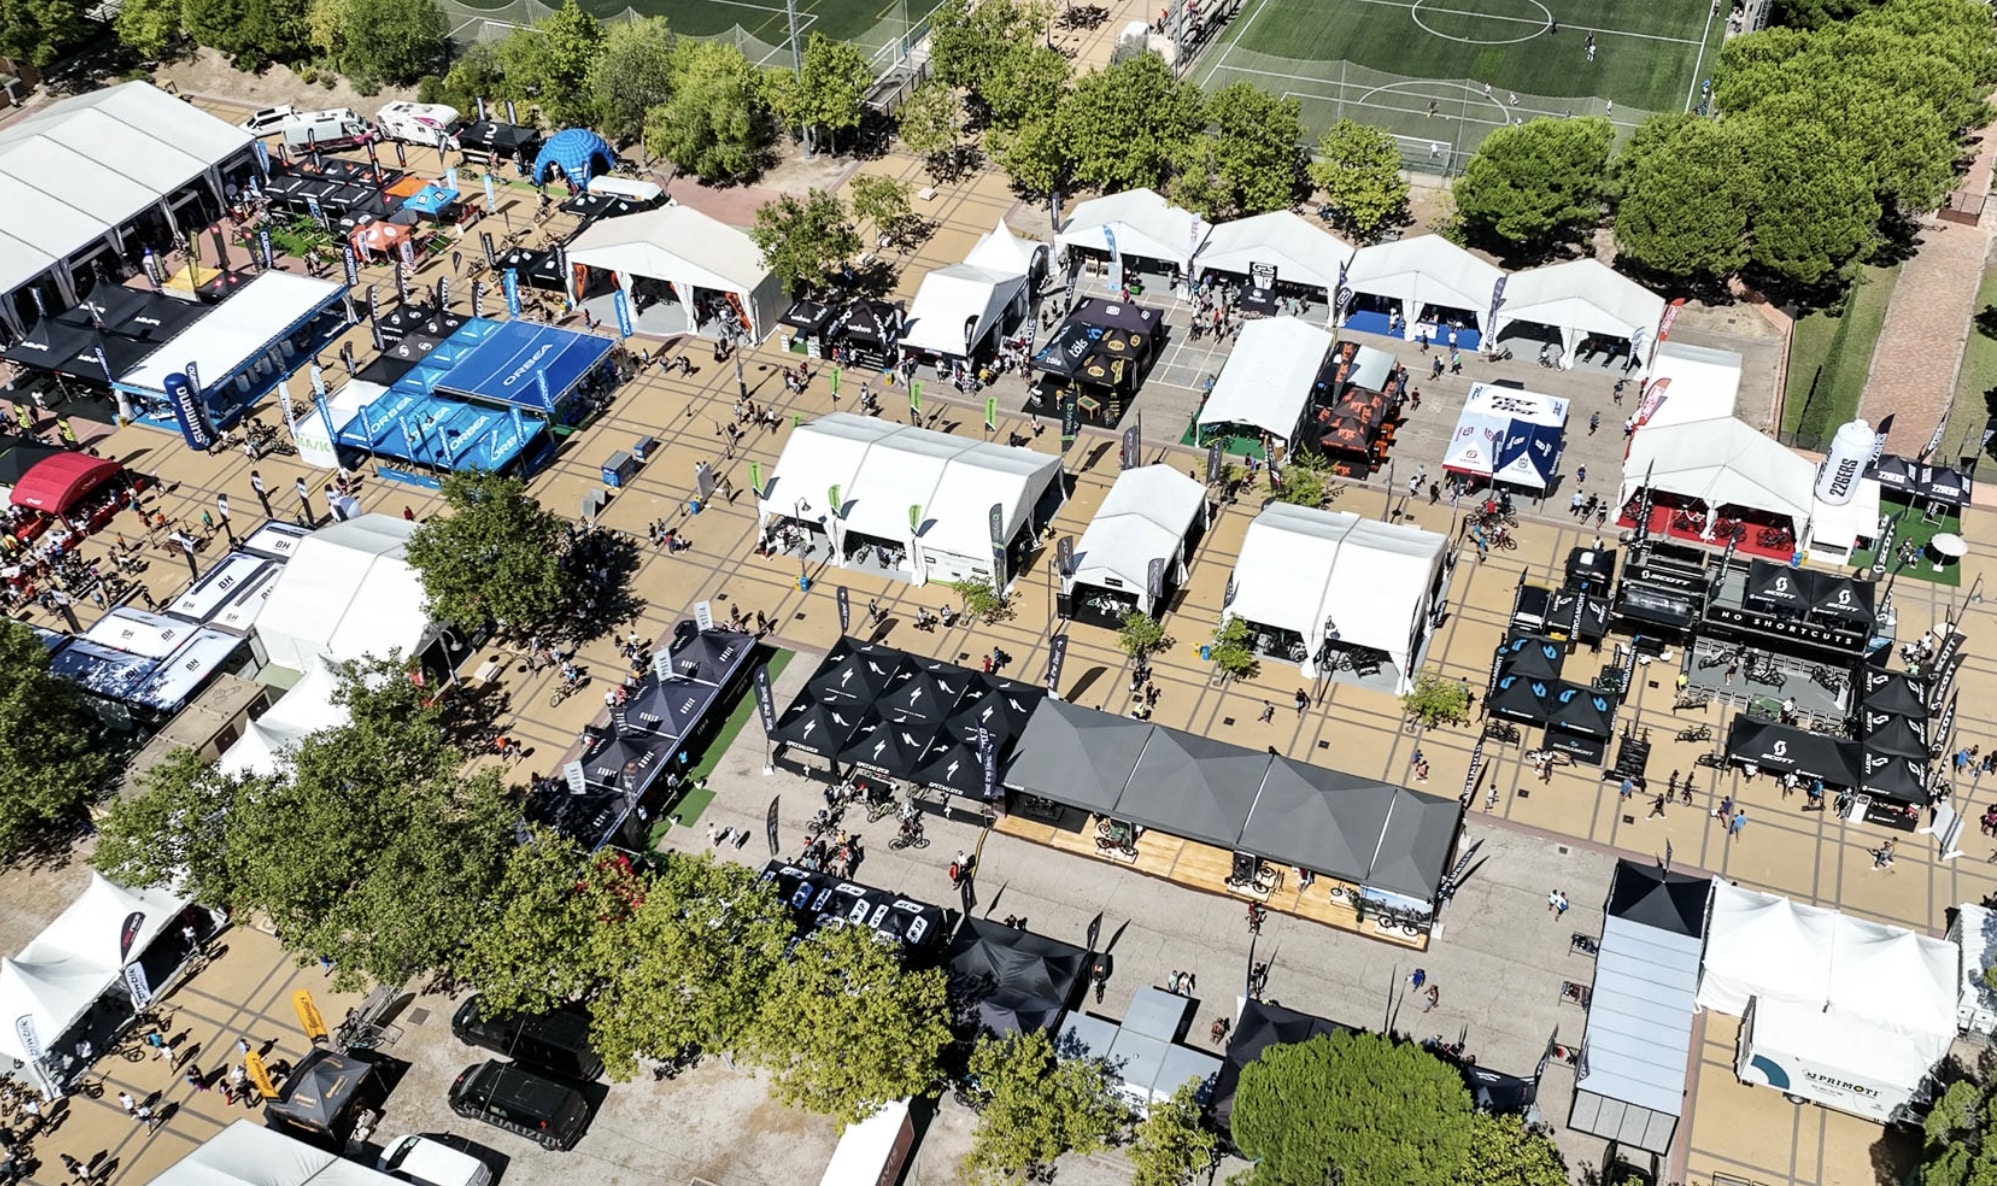 Aerial image of the Festibike